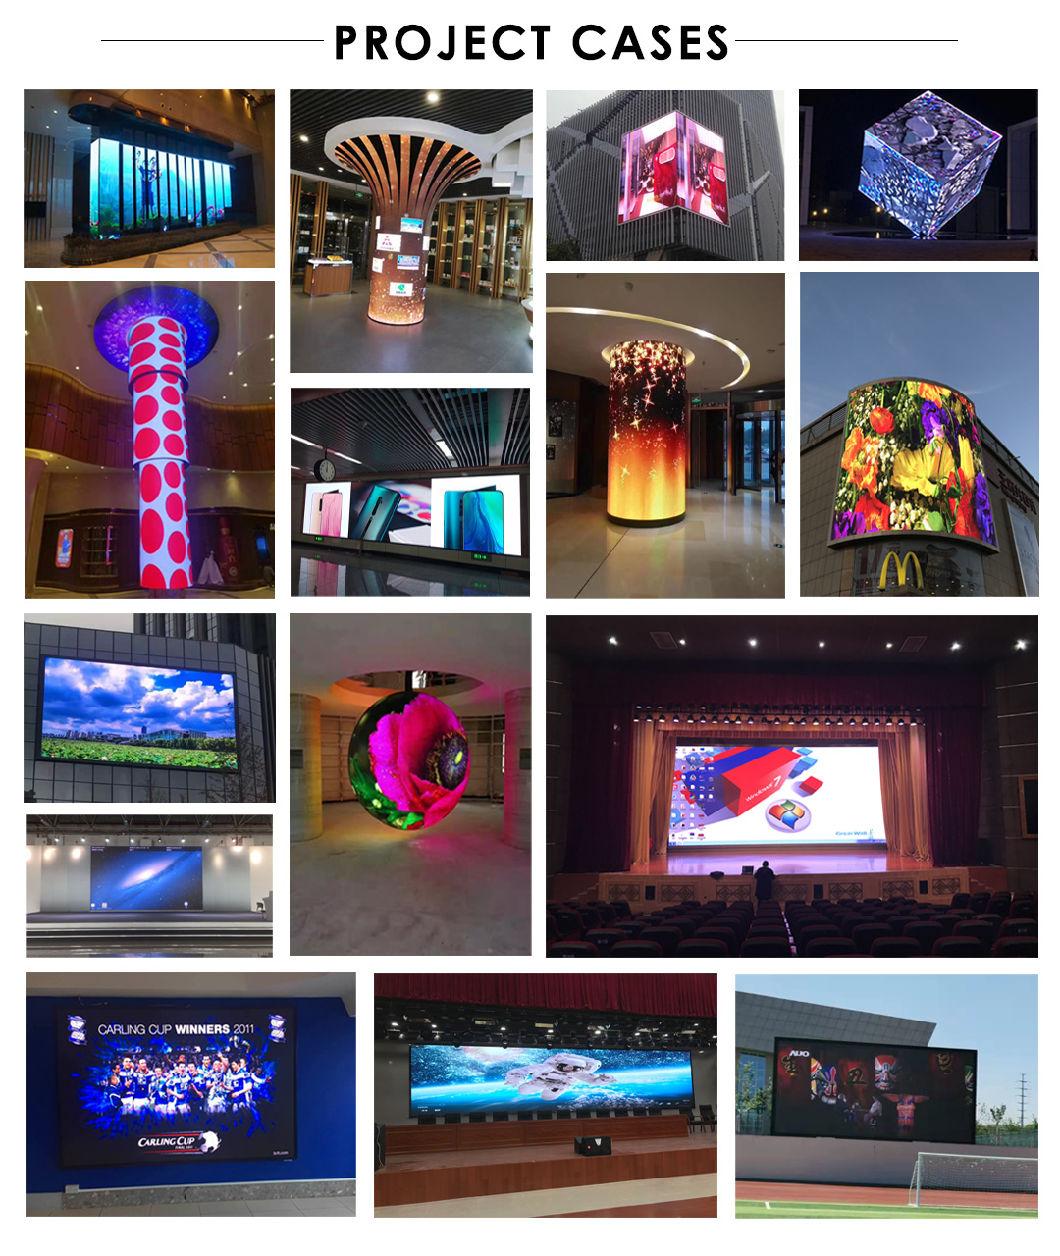 Full Color Light Weight Transparent LED Display Video Screen Billboard P3.91-7.81